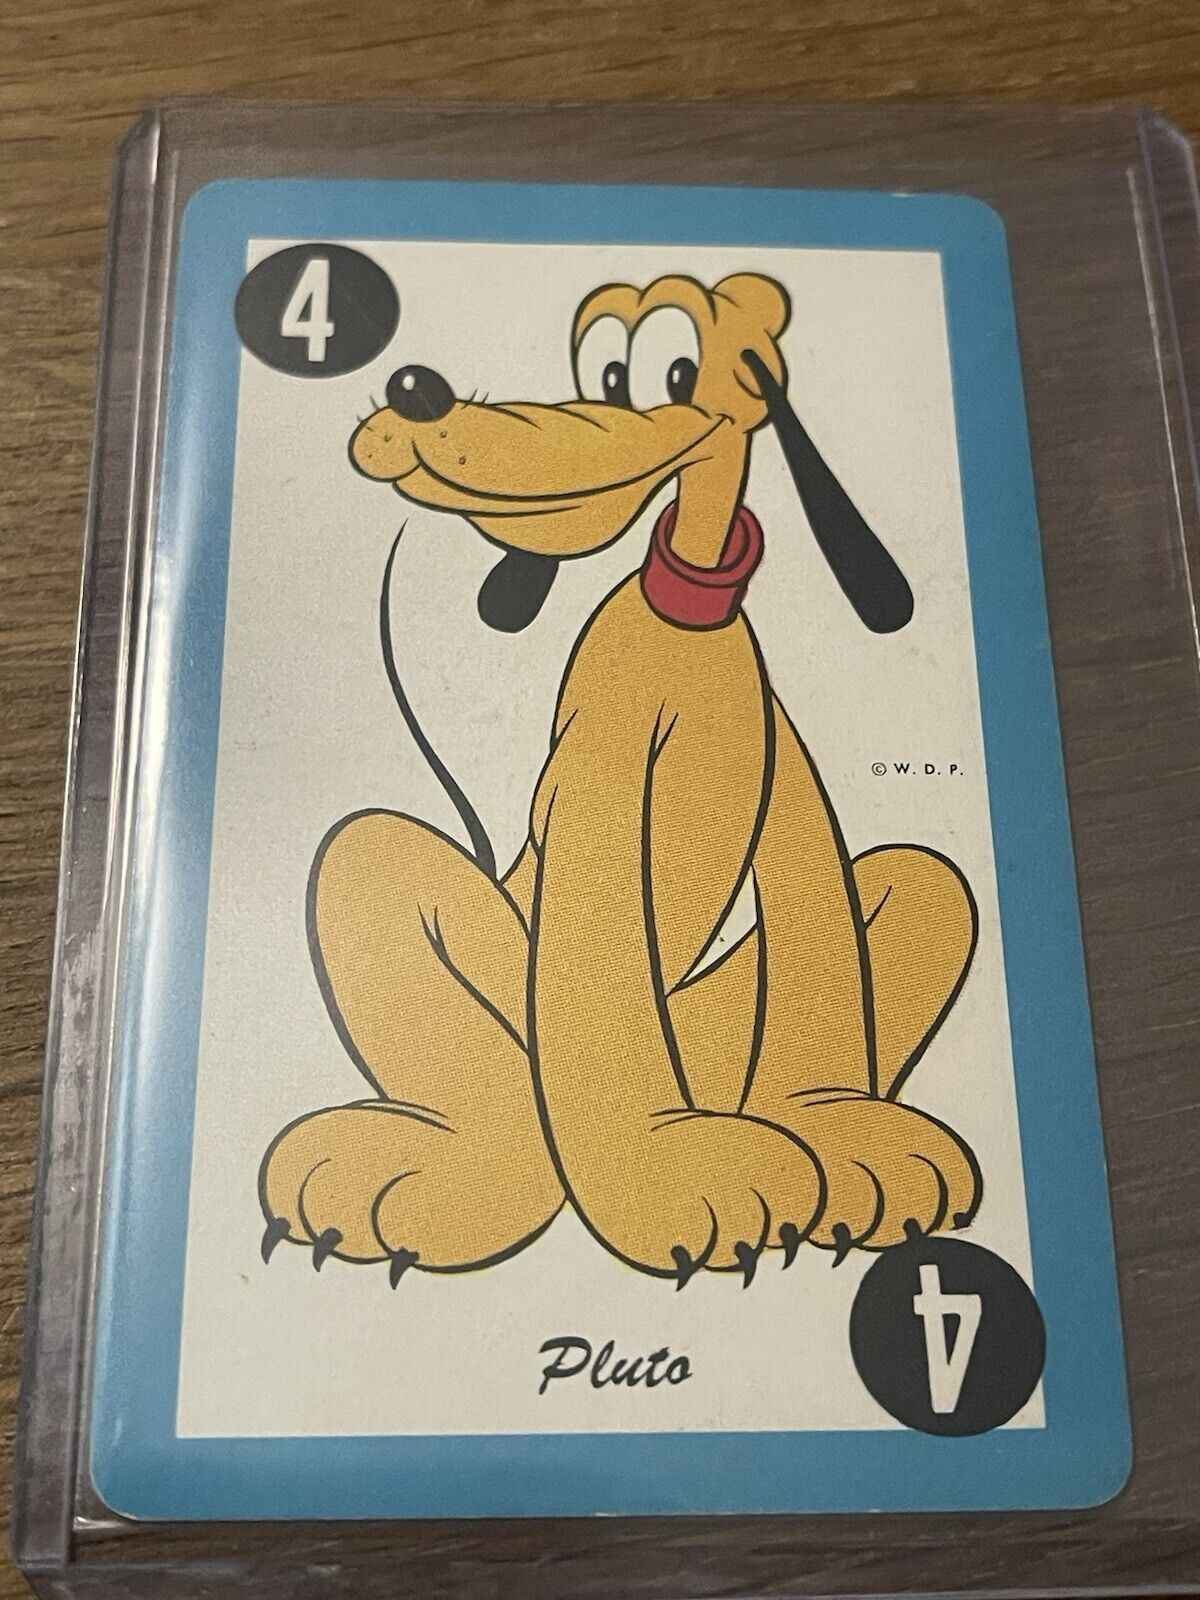 1949 WALT DISNEY PRODUCTIONS 🎥 WHITMAN CARD GAME PLUTO PLAYING CARD